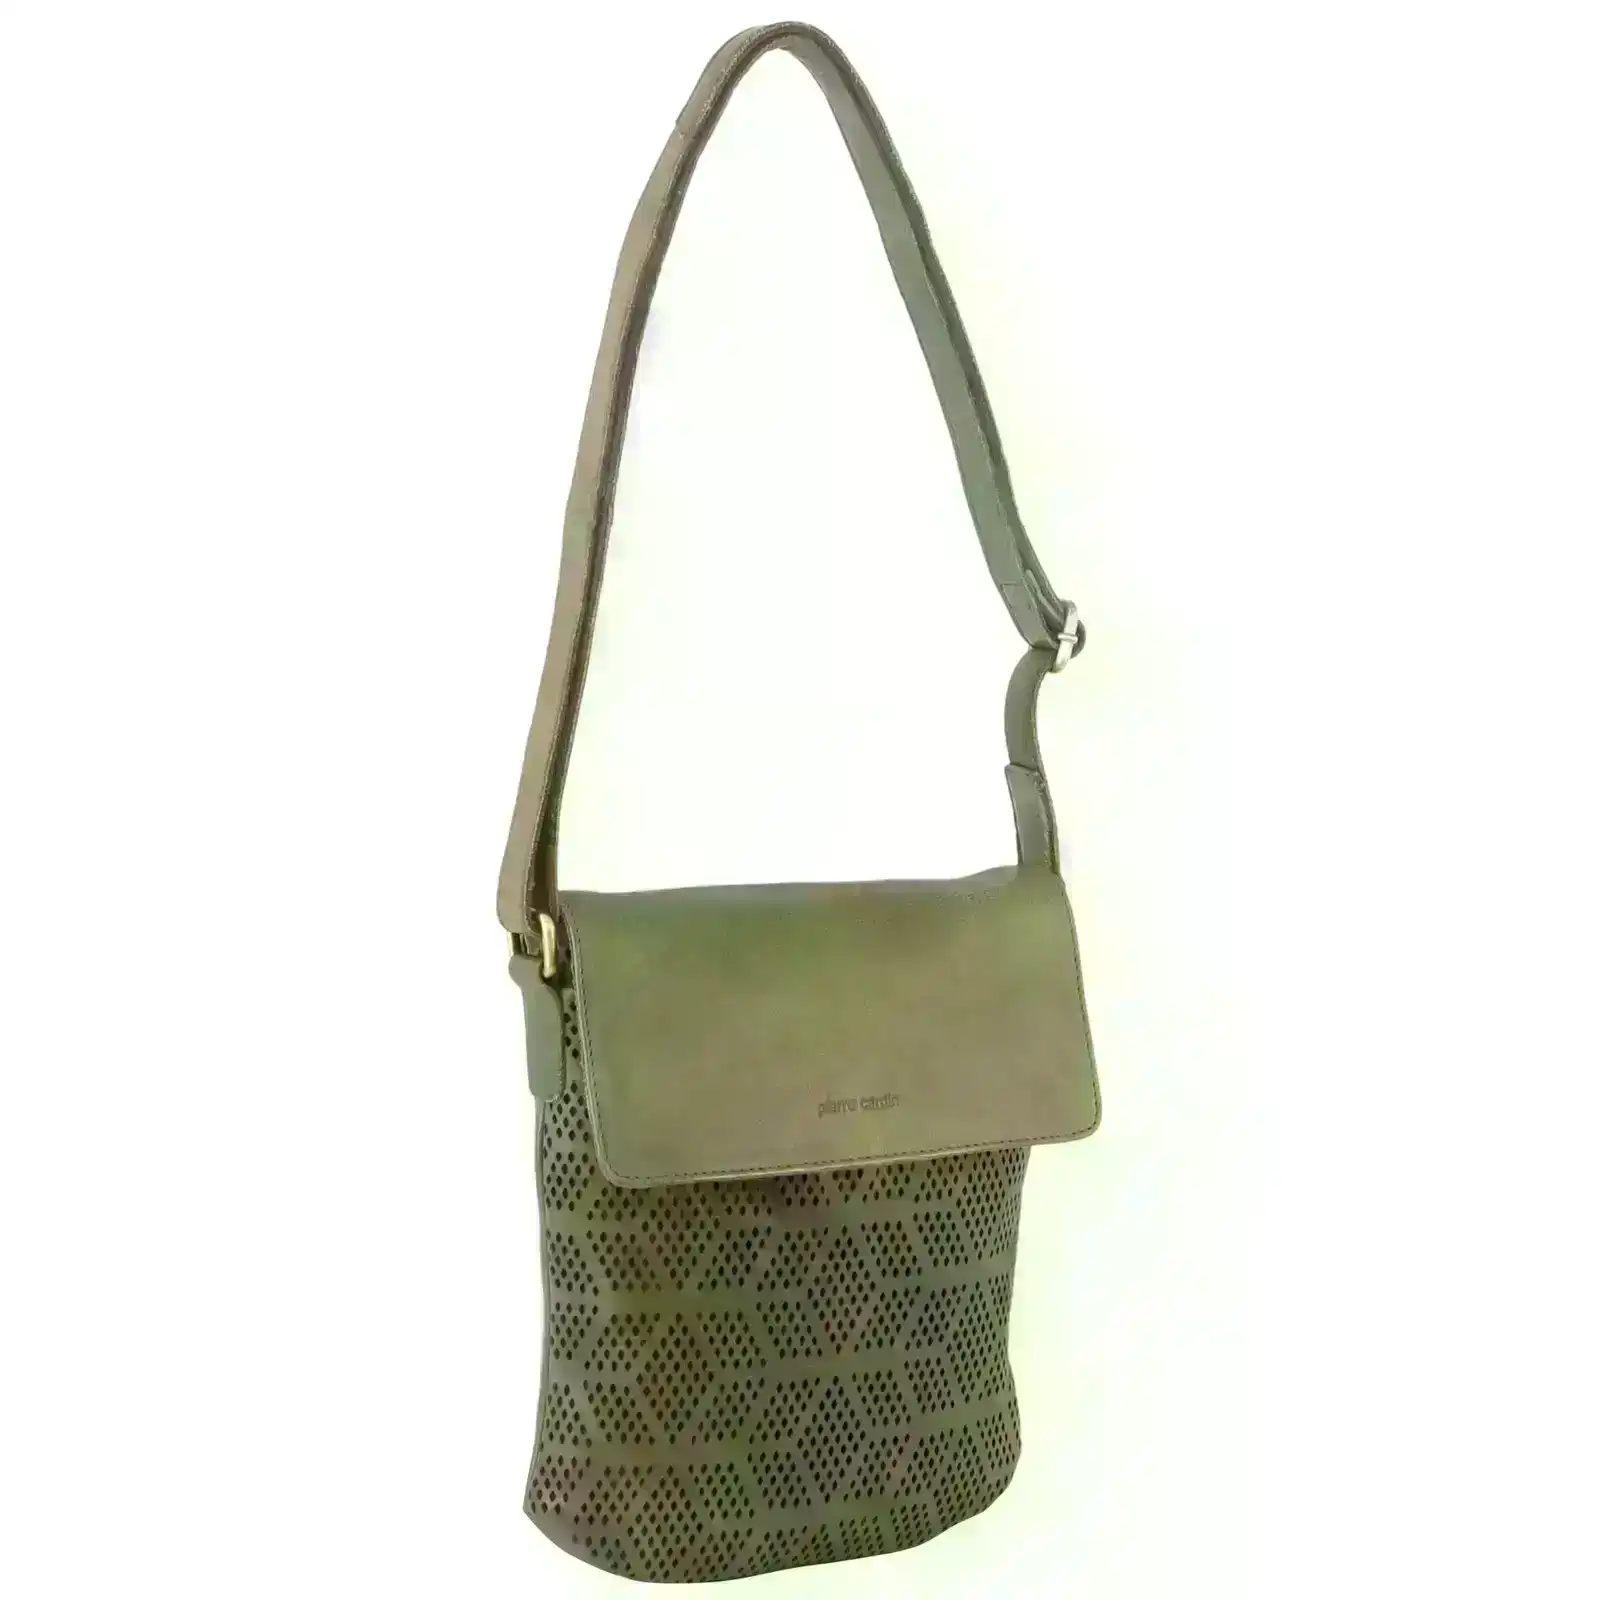 Pierre Cardin Leather Perforated Cross-Body Bag with Flap Closure - Olive